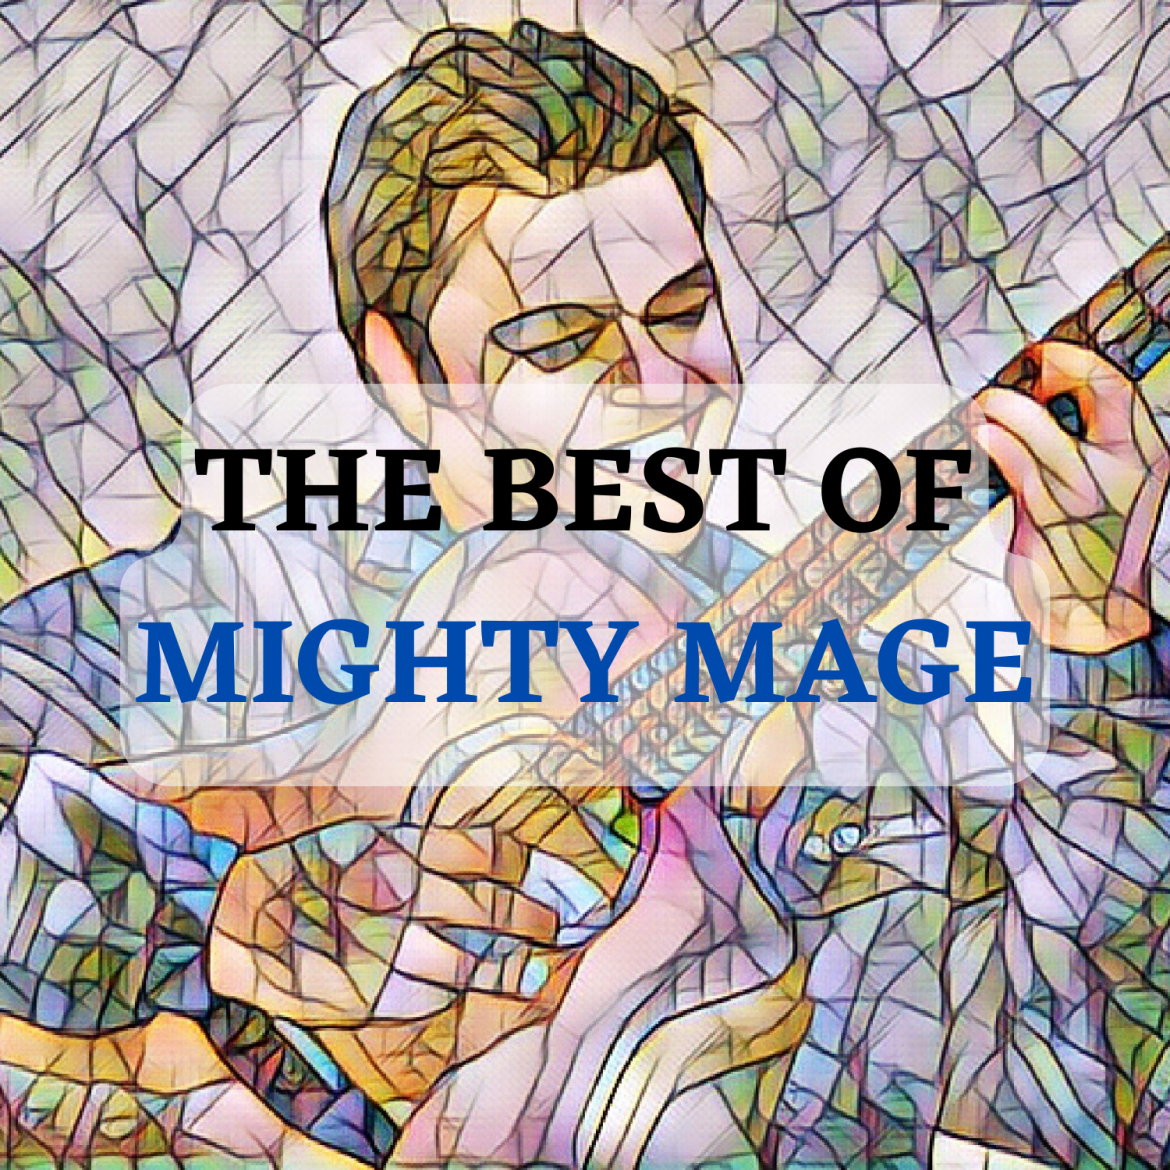 Many of the project’s songs see Mighty Mage narrate his endurance of difficulties on new album ‘The Best Of Mighty Mage’